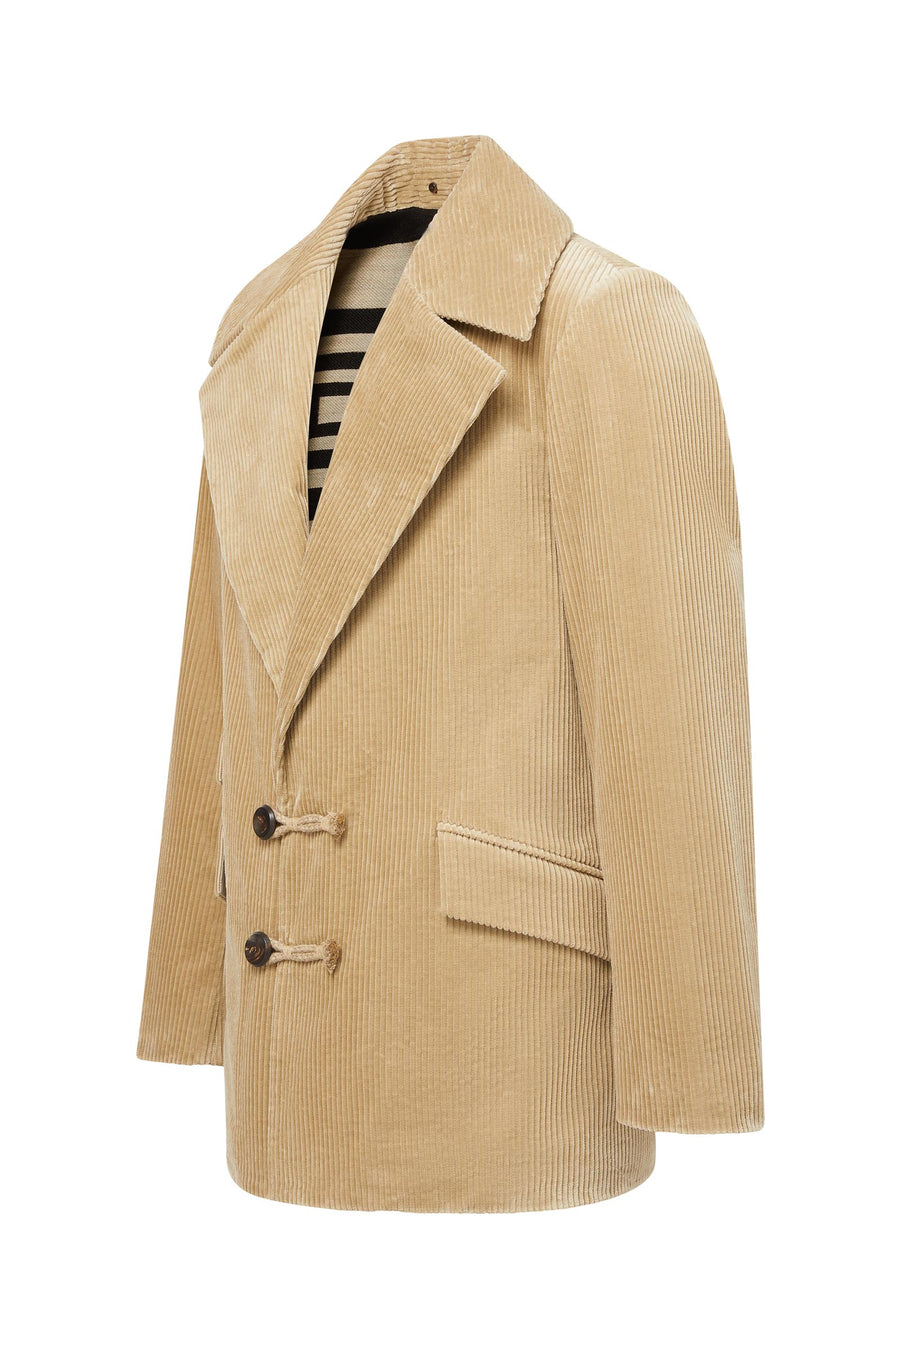 Luxury men's beige corduroy jacket with black and white wool/cotton lining